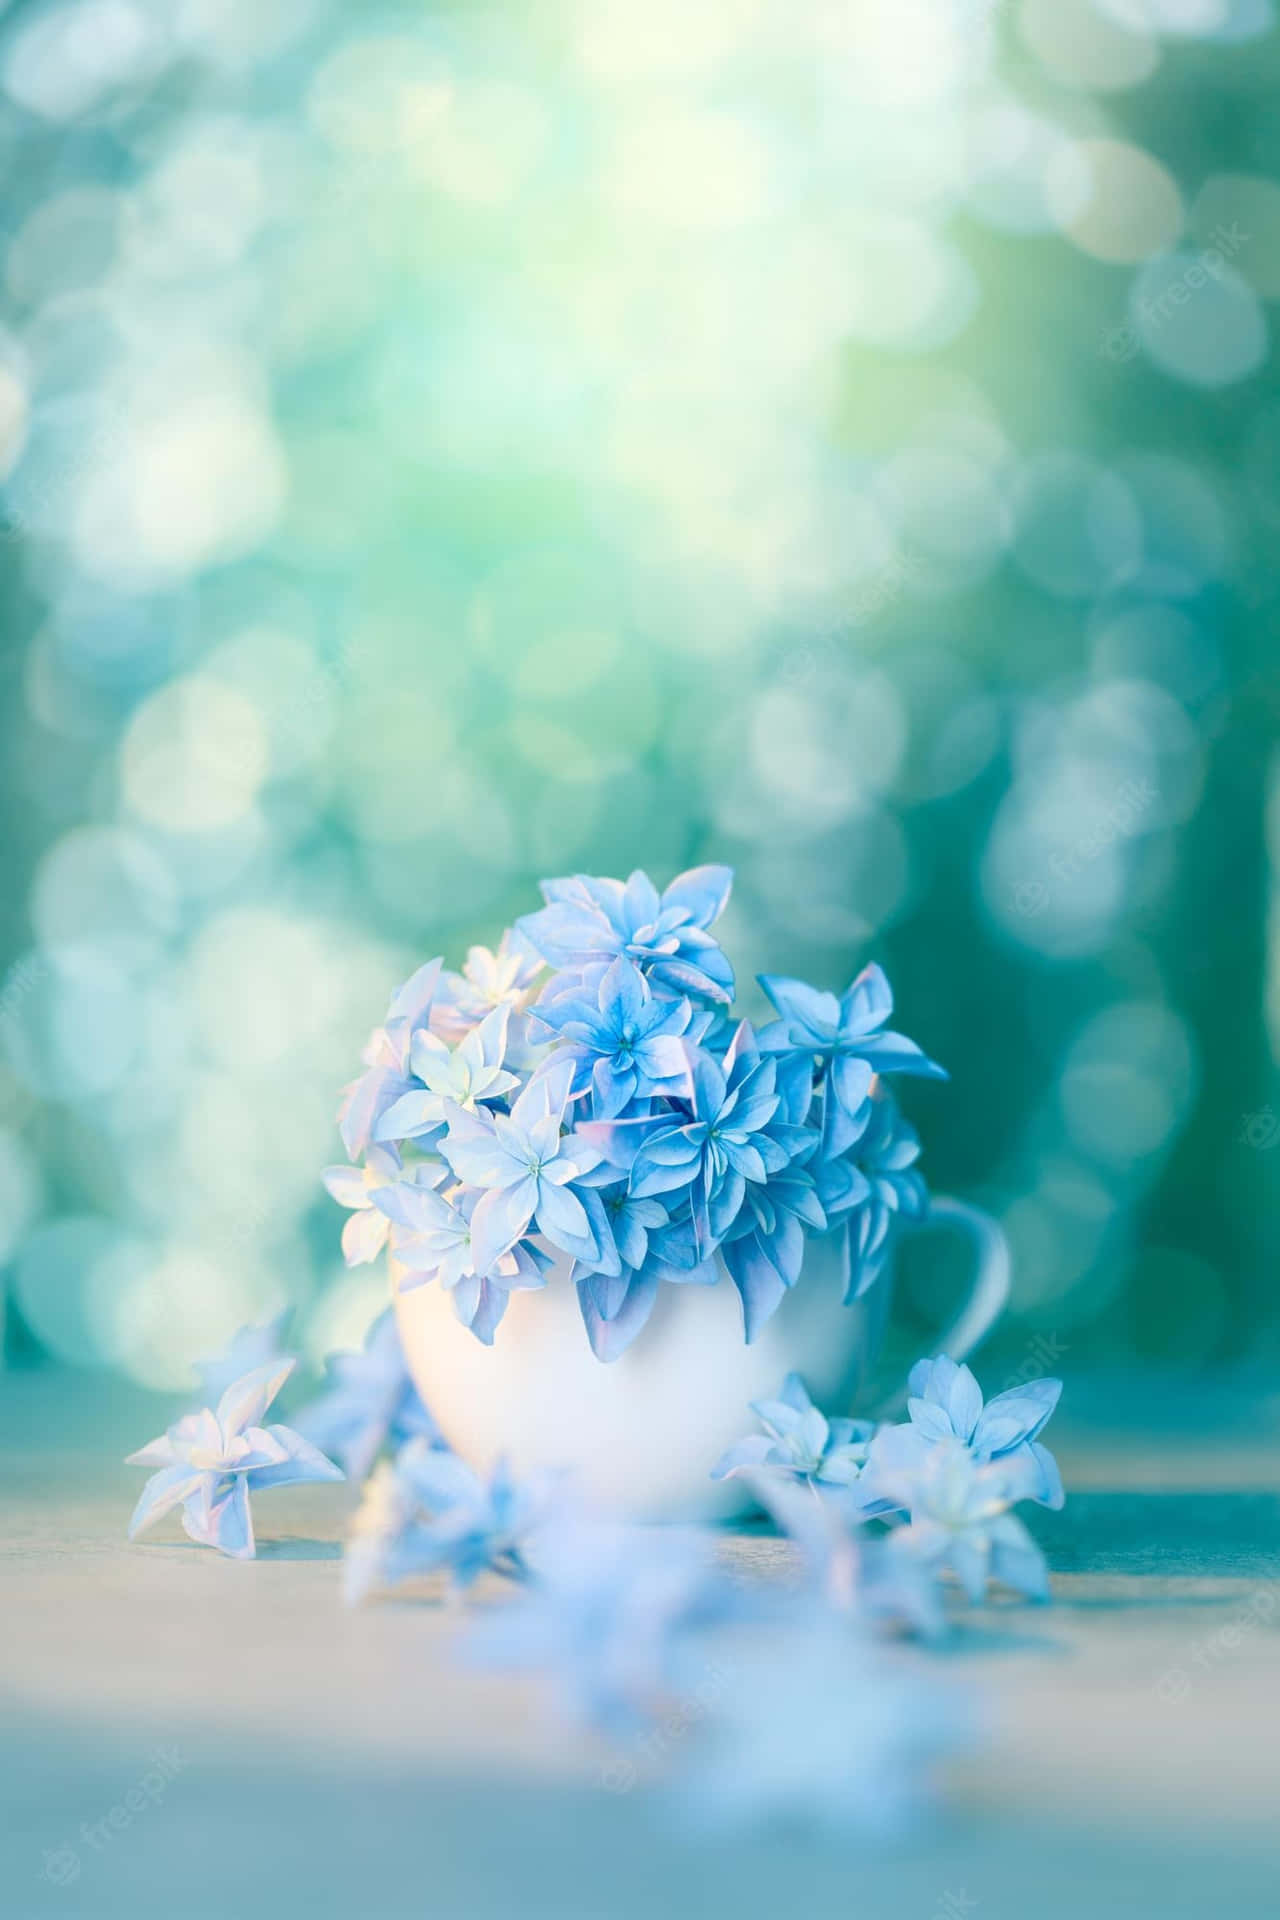 White Cup Blue Flower Bokeh Picture